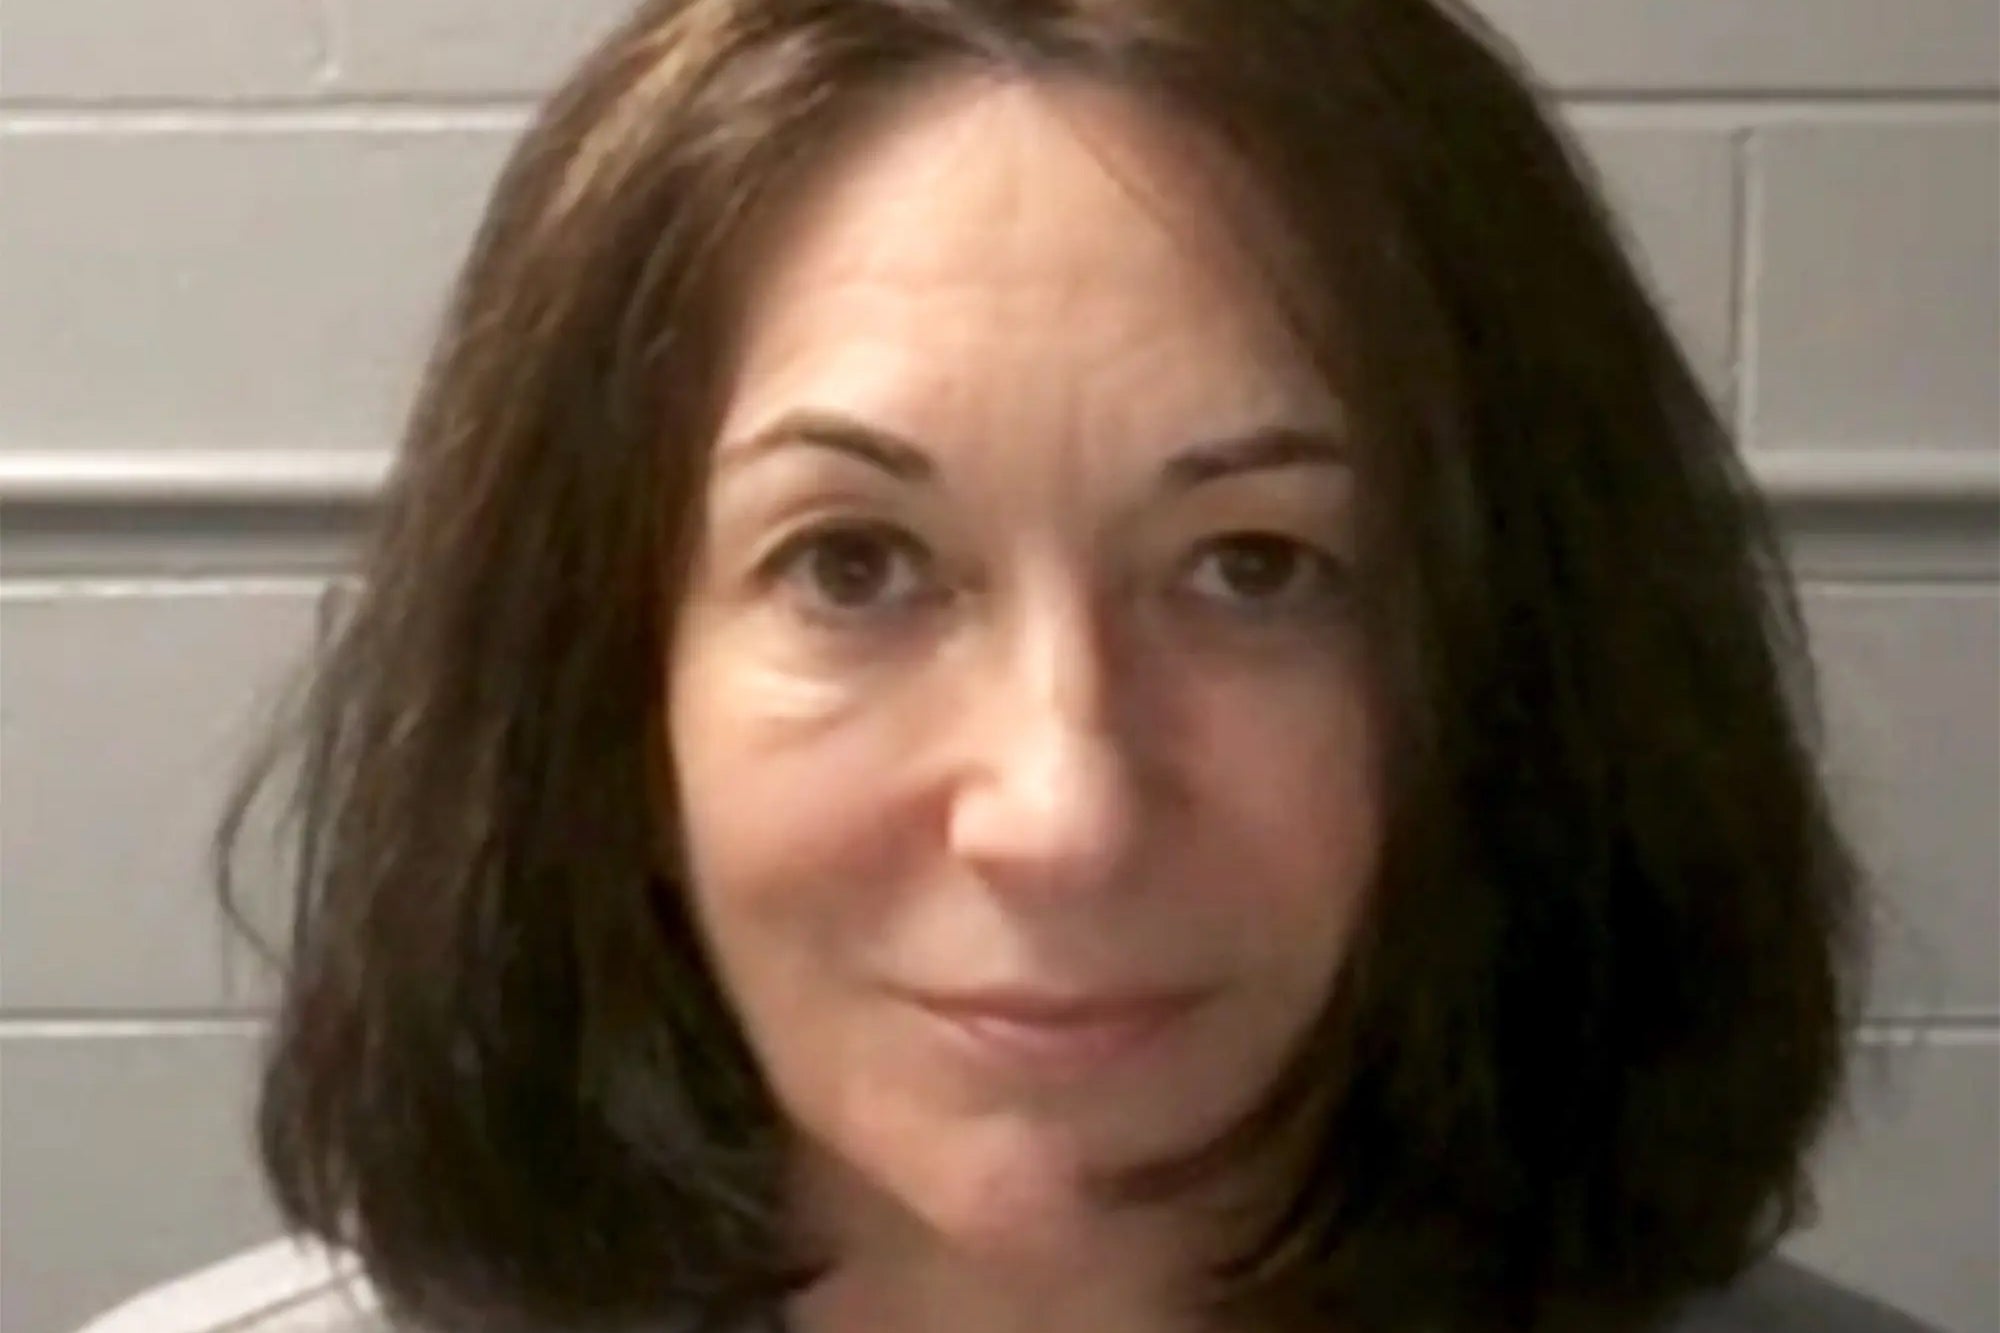 Mugshot of British convicted sex offender and former socialite Ghislaine Maxwell, taken at the Metropolitan Detention Center, Brooklyn